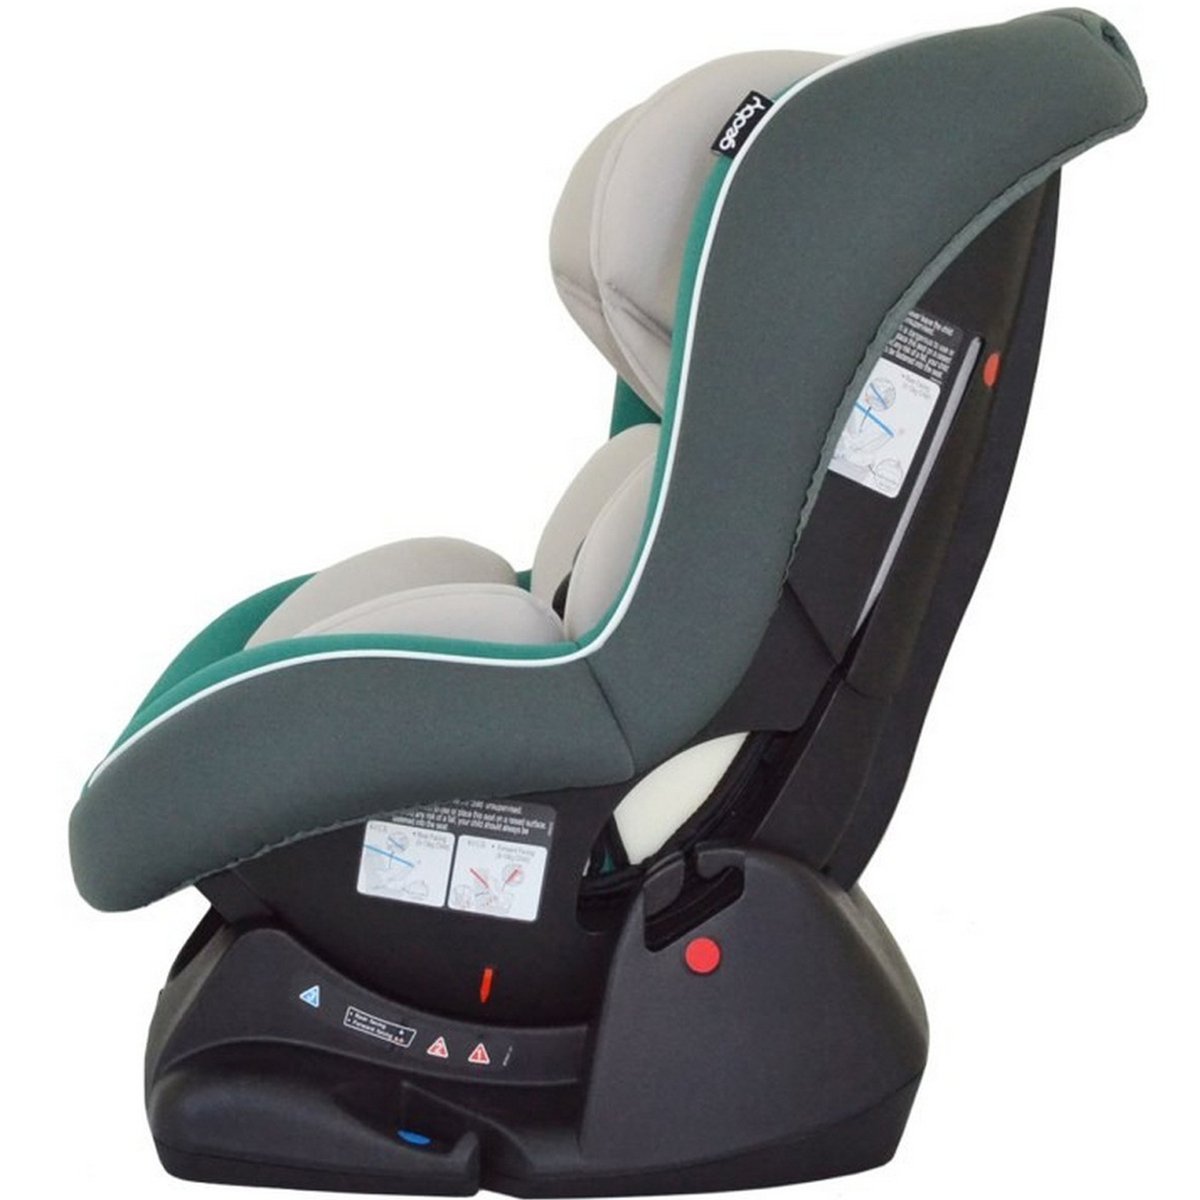 Geoby Baby Car Seat CS800 Assorted Colors